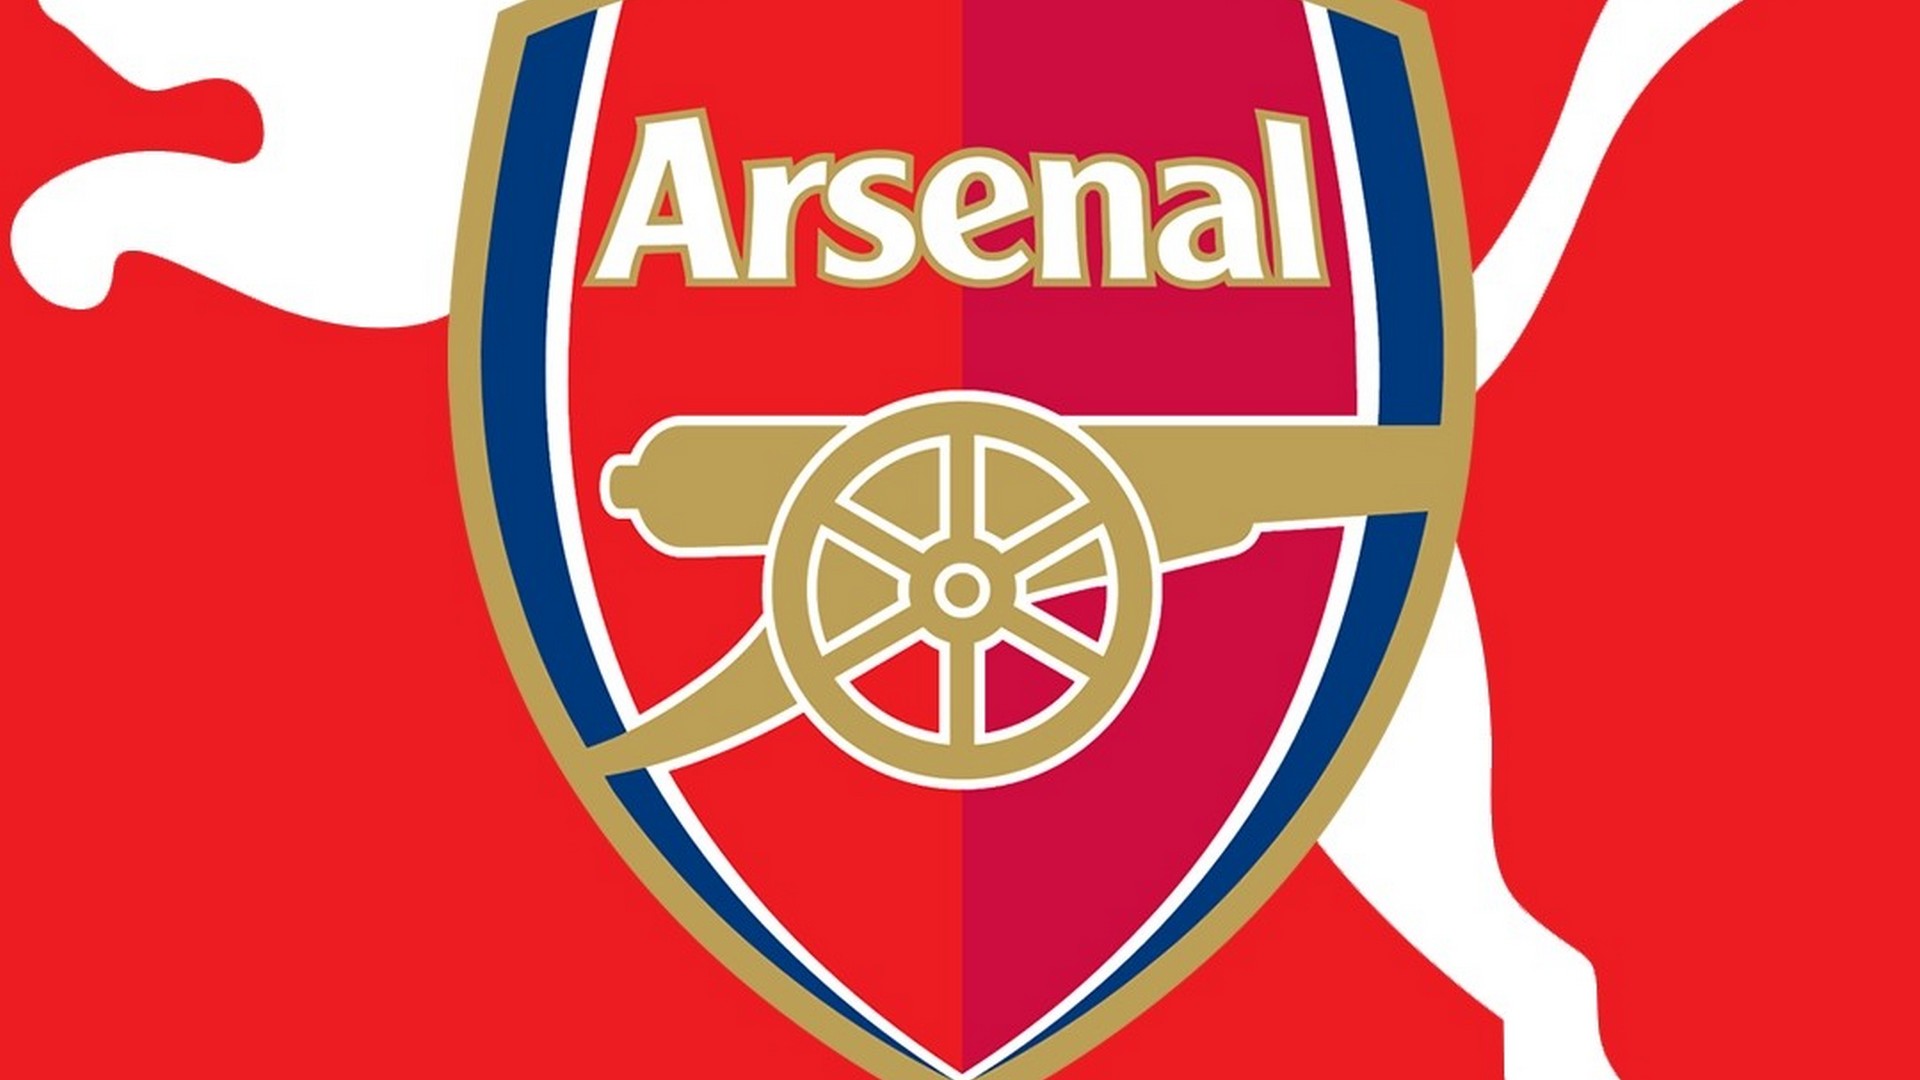 HD Desktop Wallpaper Arsenal FC with high-resolution 1920x1080 pixel. You can use this wallpaper for your Desktop Computers, Mac Screensavers, Windows Backgrounds, iPhone Wallpapers, Tablet or Android Lock screen and another Mobile device